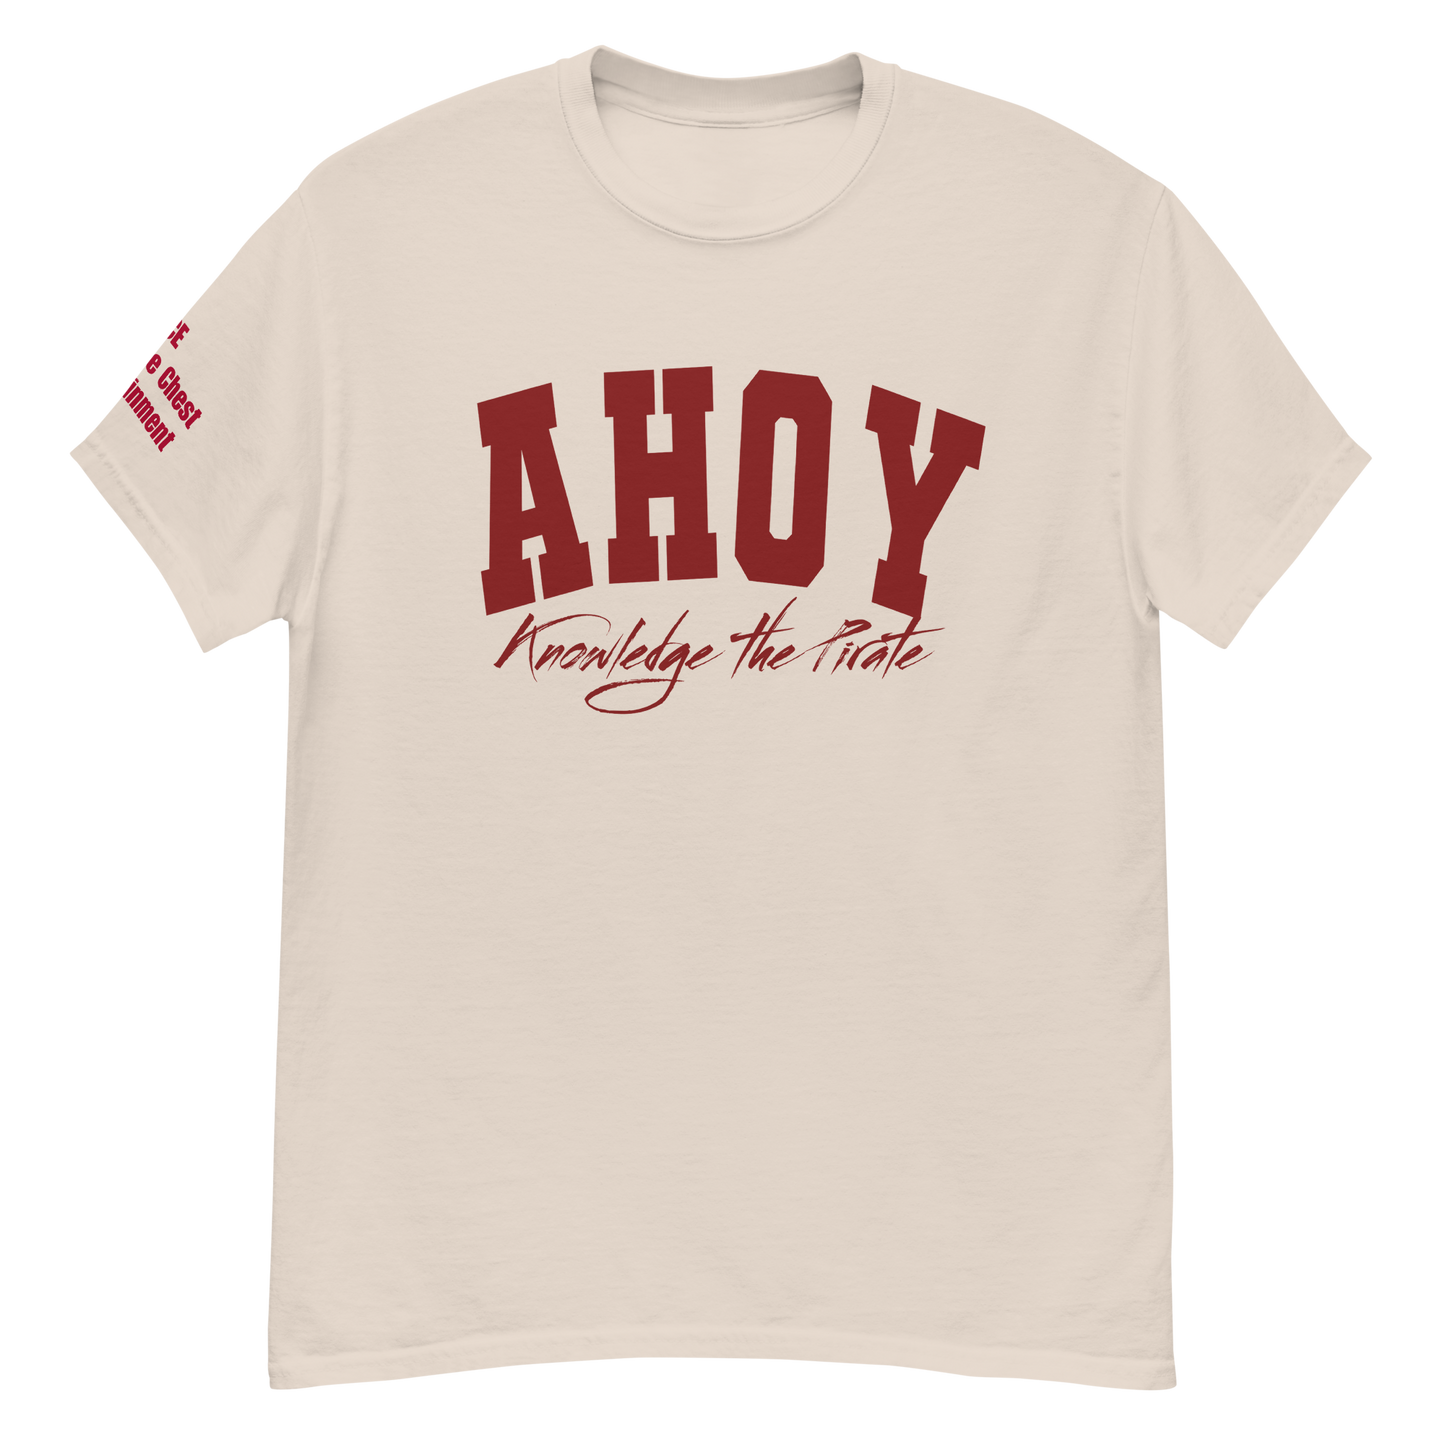 Red Ahoy T-Shirt - 5 lbs of Pressure Collection